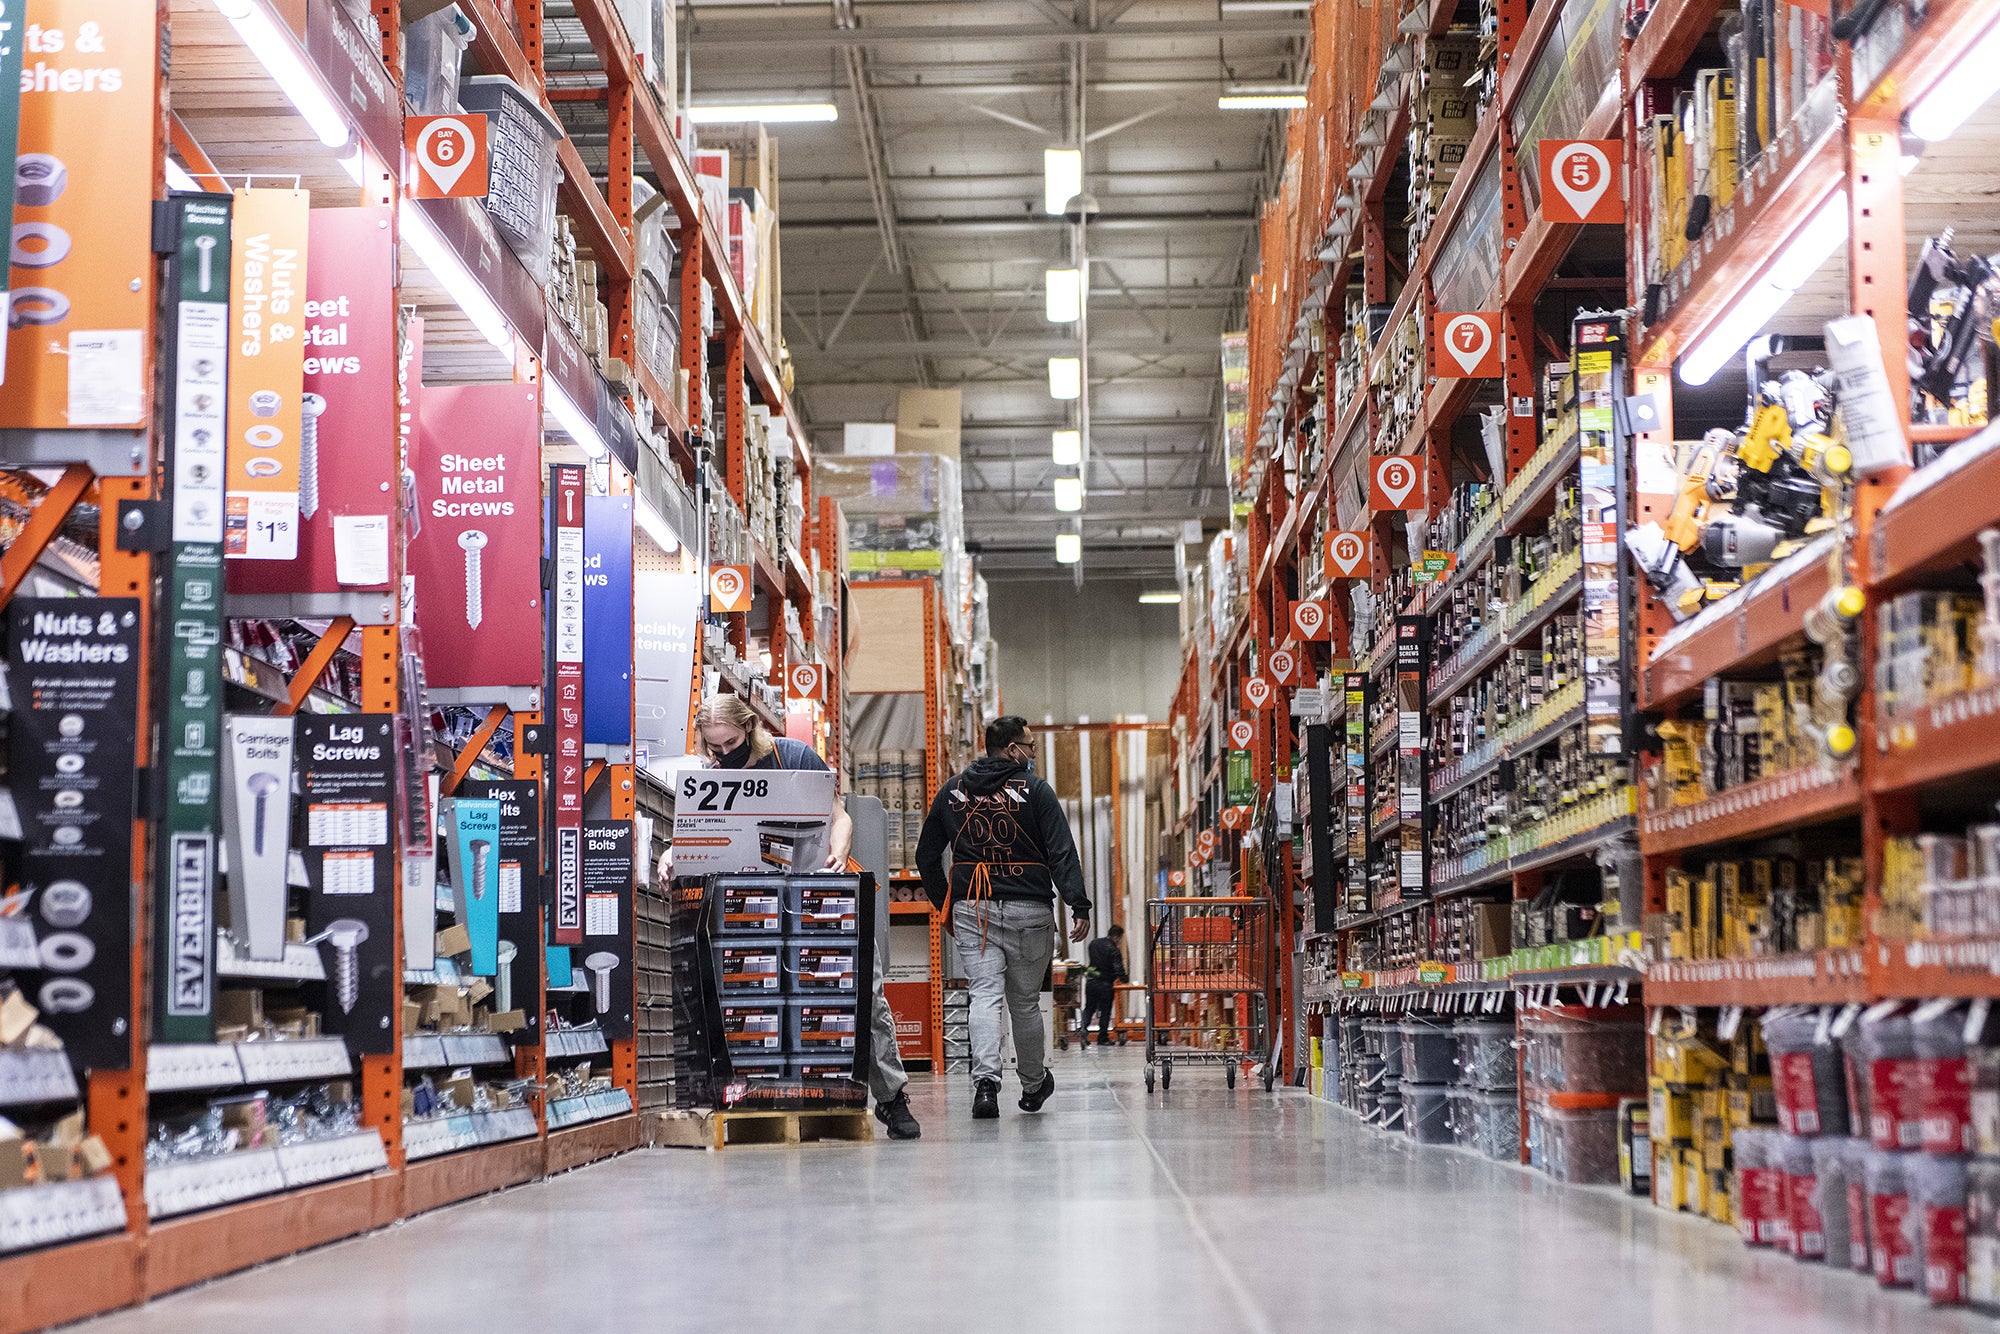 Home Depot to spend $1 billion more on hourly workers